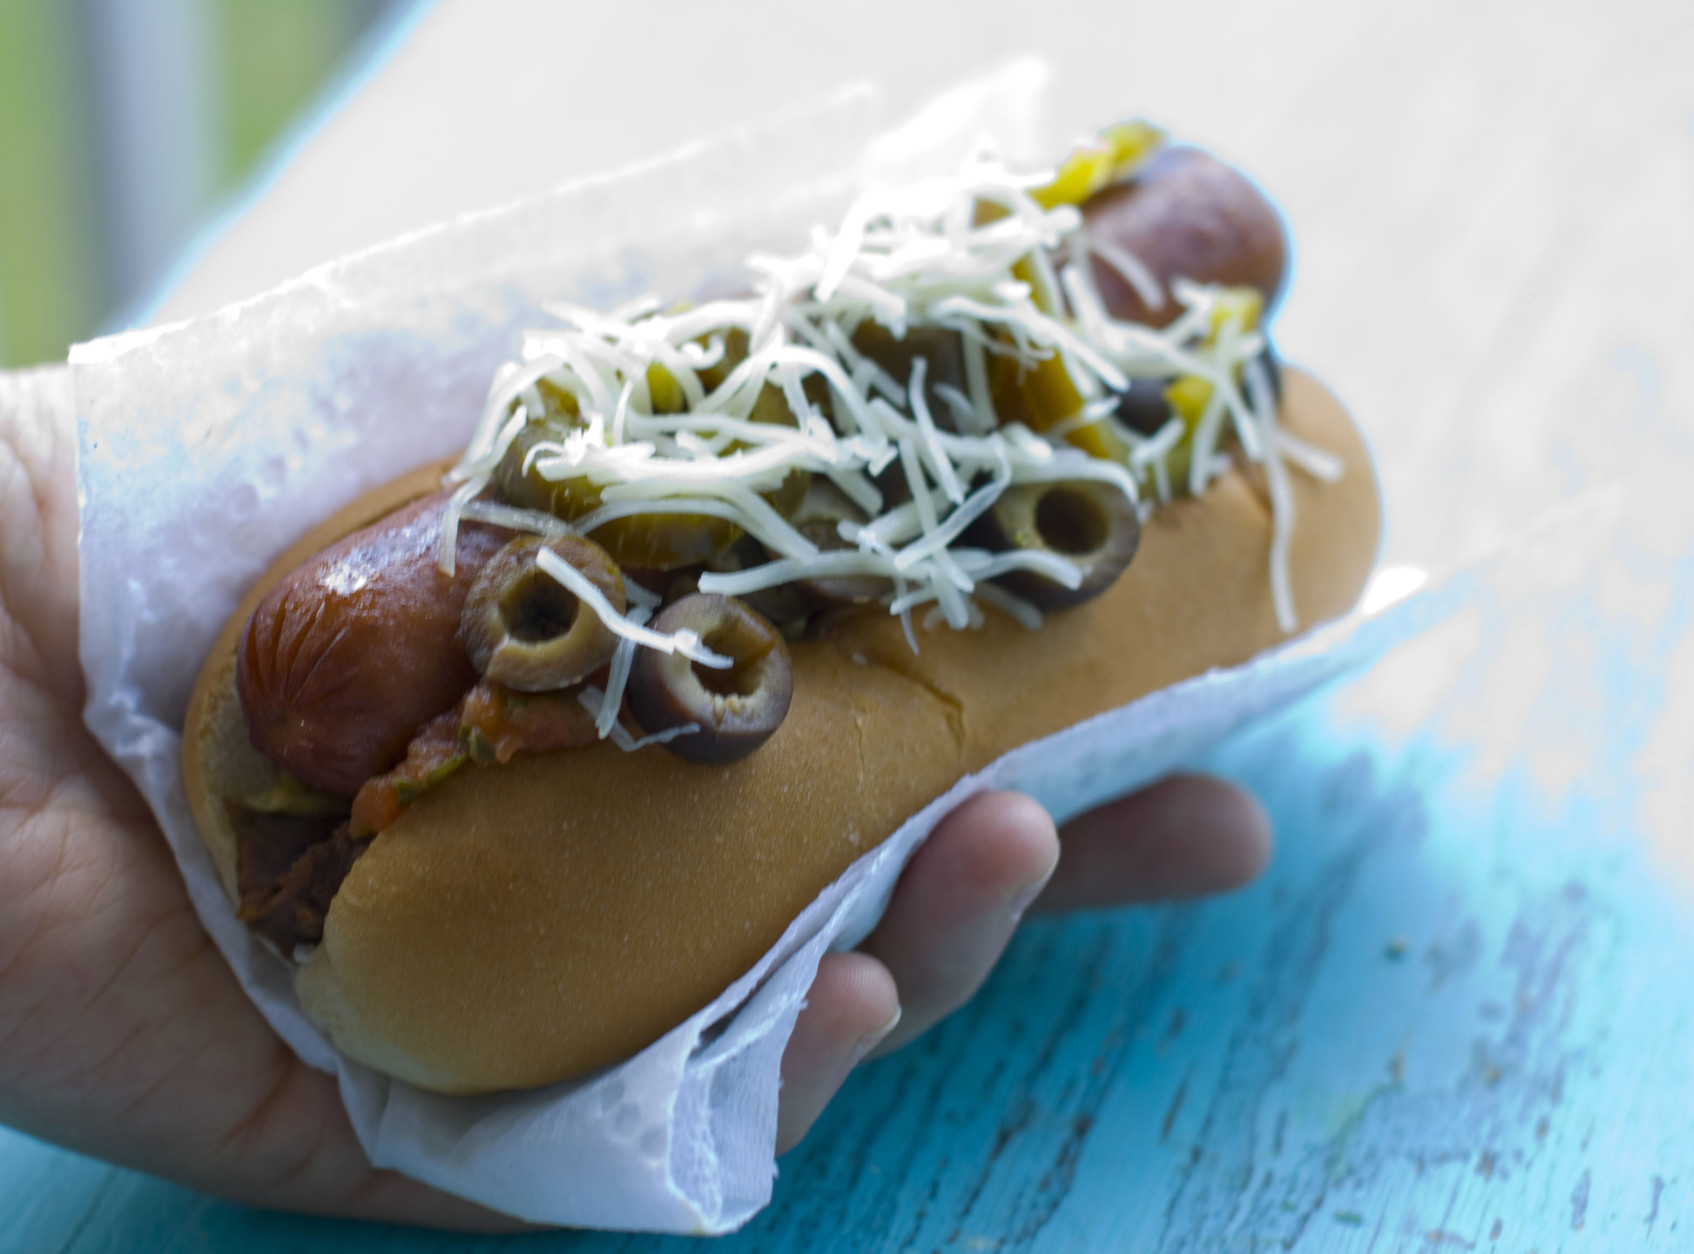 In this image taken on July 30, 2012, a taco hot dog is shown in Concord, N.H. (AP Photo/Matthew Mead)